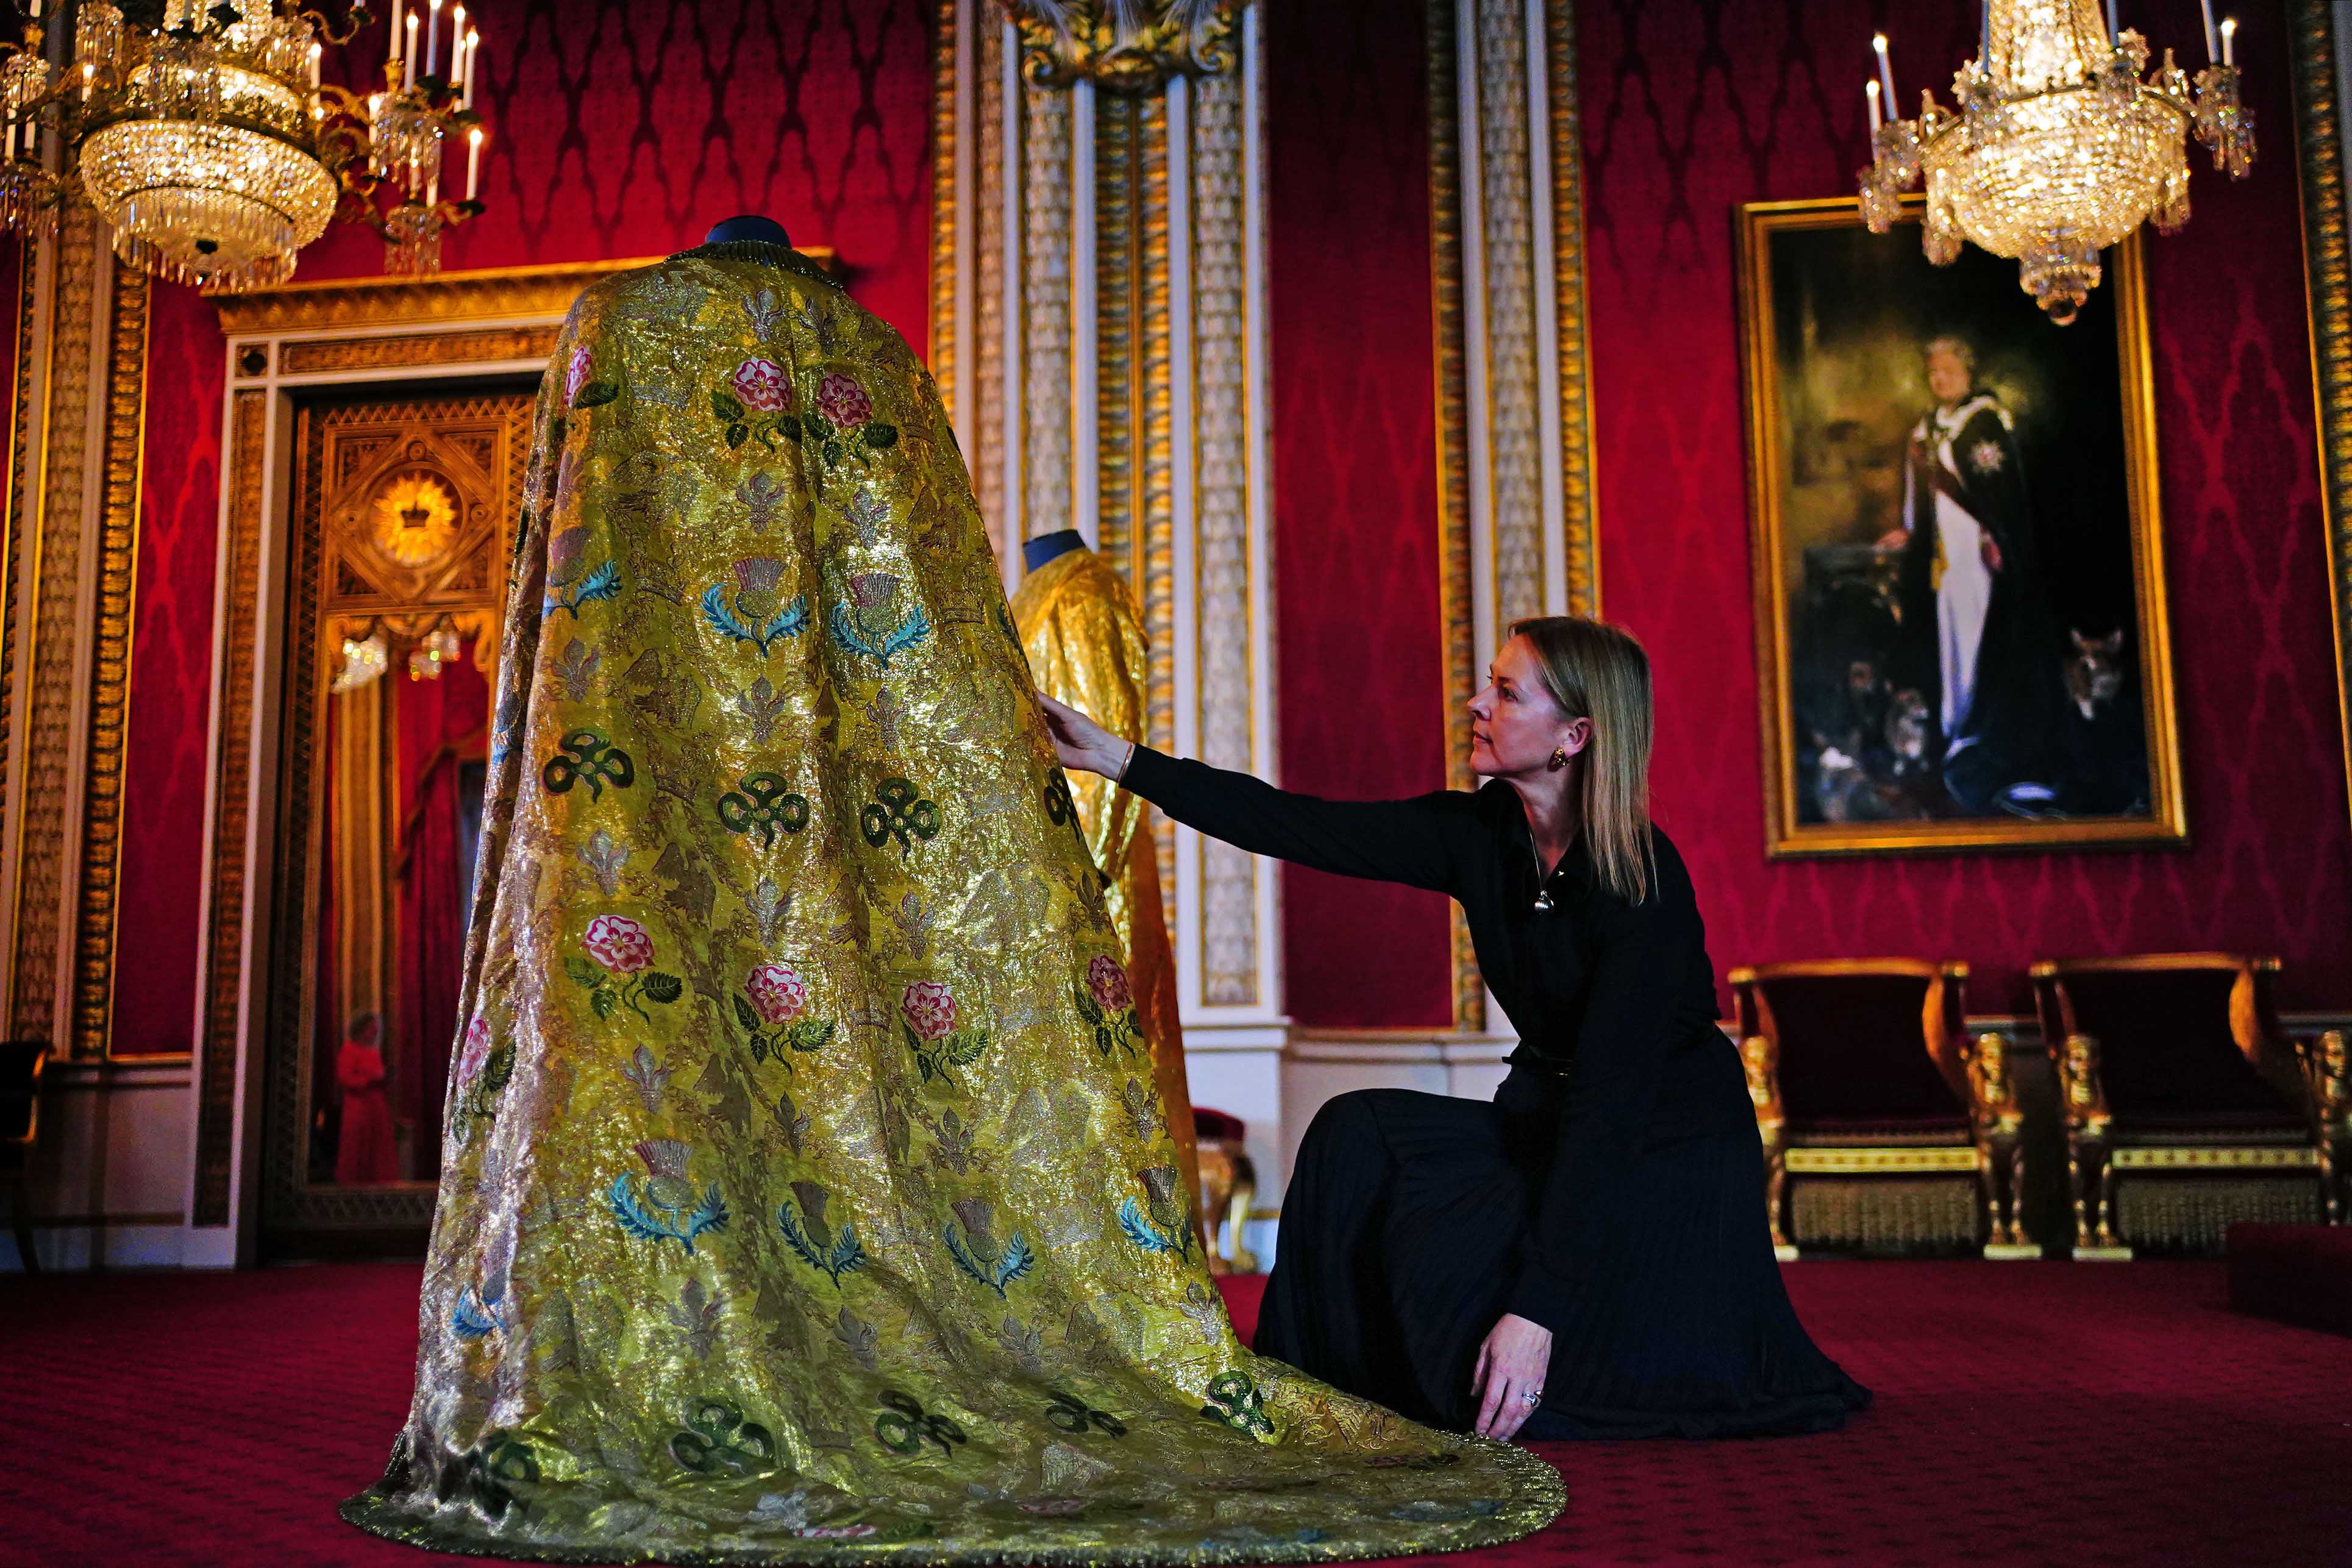 Caroline de Guitaut, deputy surveyor of the King's Works of Art for the Royal Collection Trust, adjusts the Imperial Mantle in the Throne Room at Buckingham Palace 